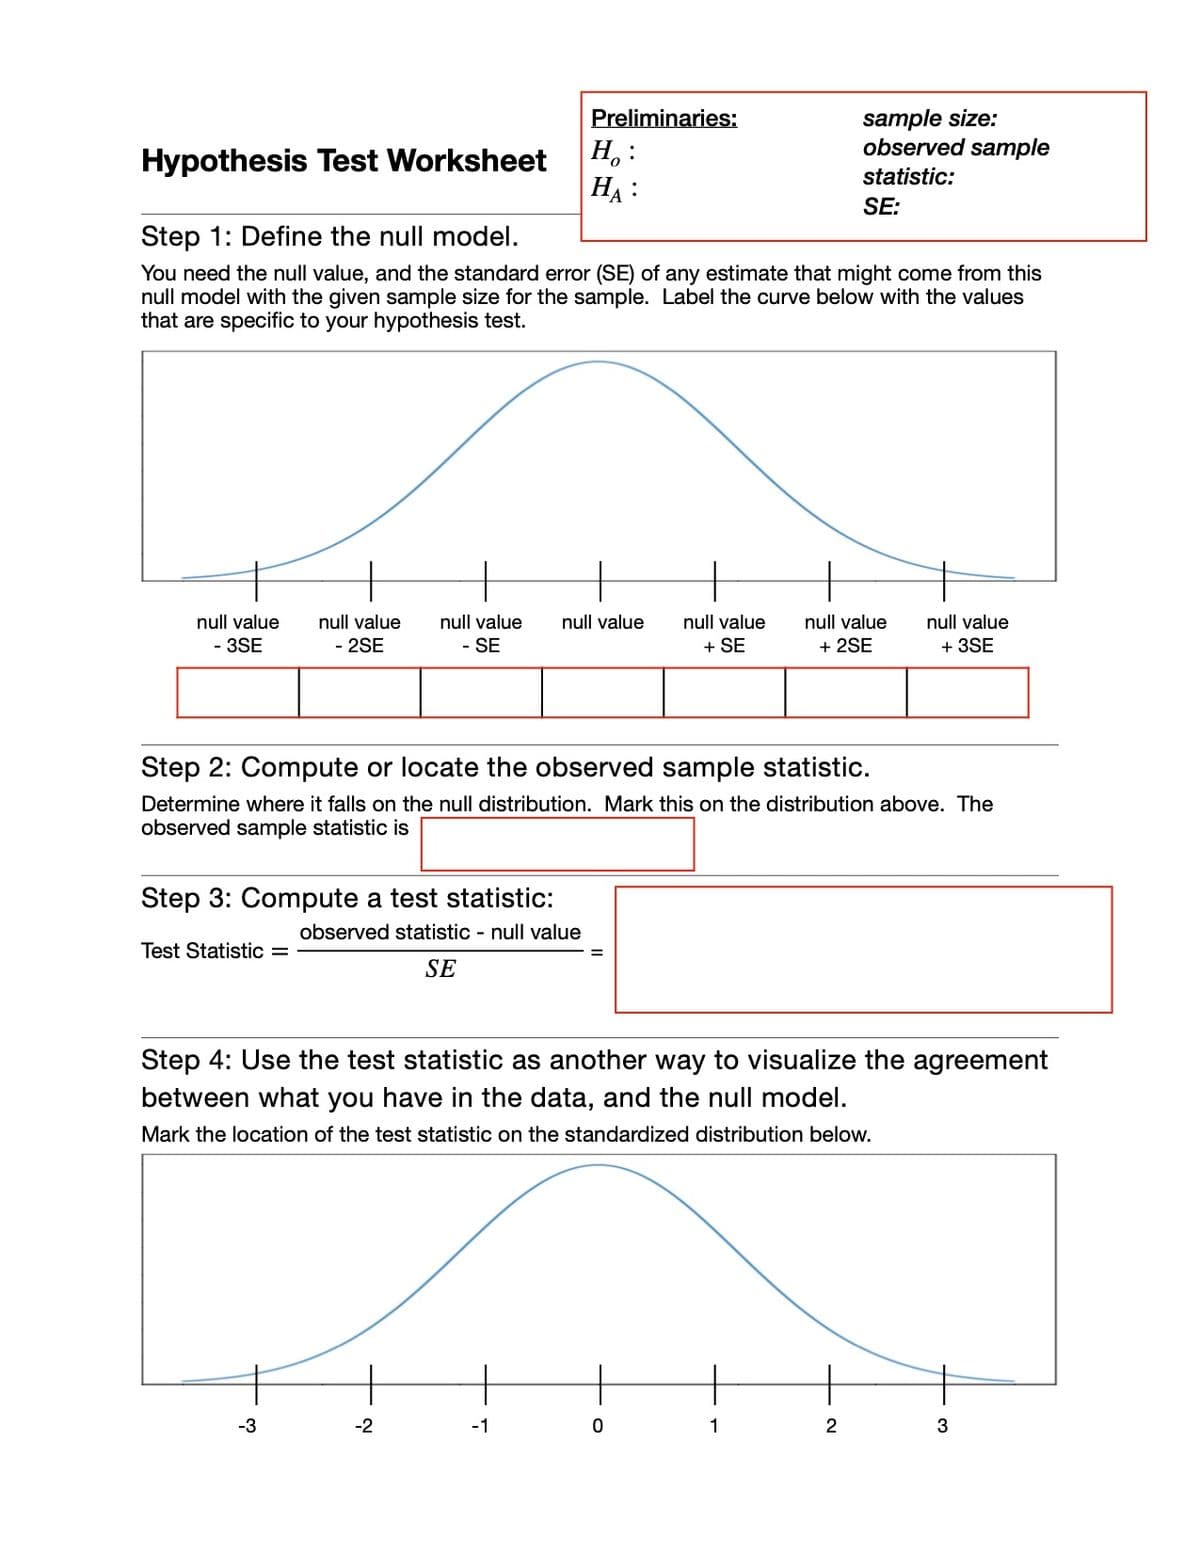 sample size:
observed sample
Preliminaries:
H, :
На :
Hypothesis Test Worksheet
statistic:
SE:
Step 1: Define the null model.
You need the null value, and the standard error (SE) of any estimate that might come from this
null model with the given sample size for the sample. Label the curve below with the values
that are specific to your hypothesis test.
null value
null value
null value
null value
null value
null value
null value
- 3SE
- 2SE
- SE
+ SE
+ 2SE
+ 3SE
Step 2: Compute or locate the observed sample statistic.
Determine where it falls on the null distribution. Mark this on the distribution above. The
observed sample statistic is
Step 3: Compute a test statistic:
observed statistic - null value
Test Statistic =
SE
Step 4: Use the test statistic as another way to visualize the agreement
between what you have in the data, and the null model.
Mark the location of the test statistic on the standardized distribution below.
-3
-2
-1
1
